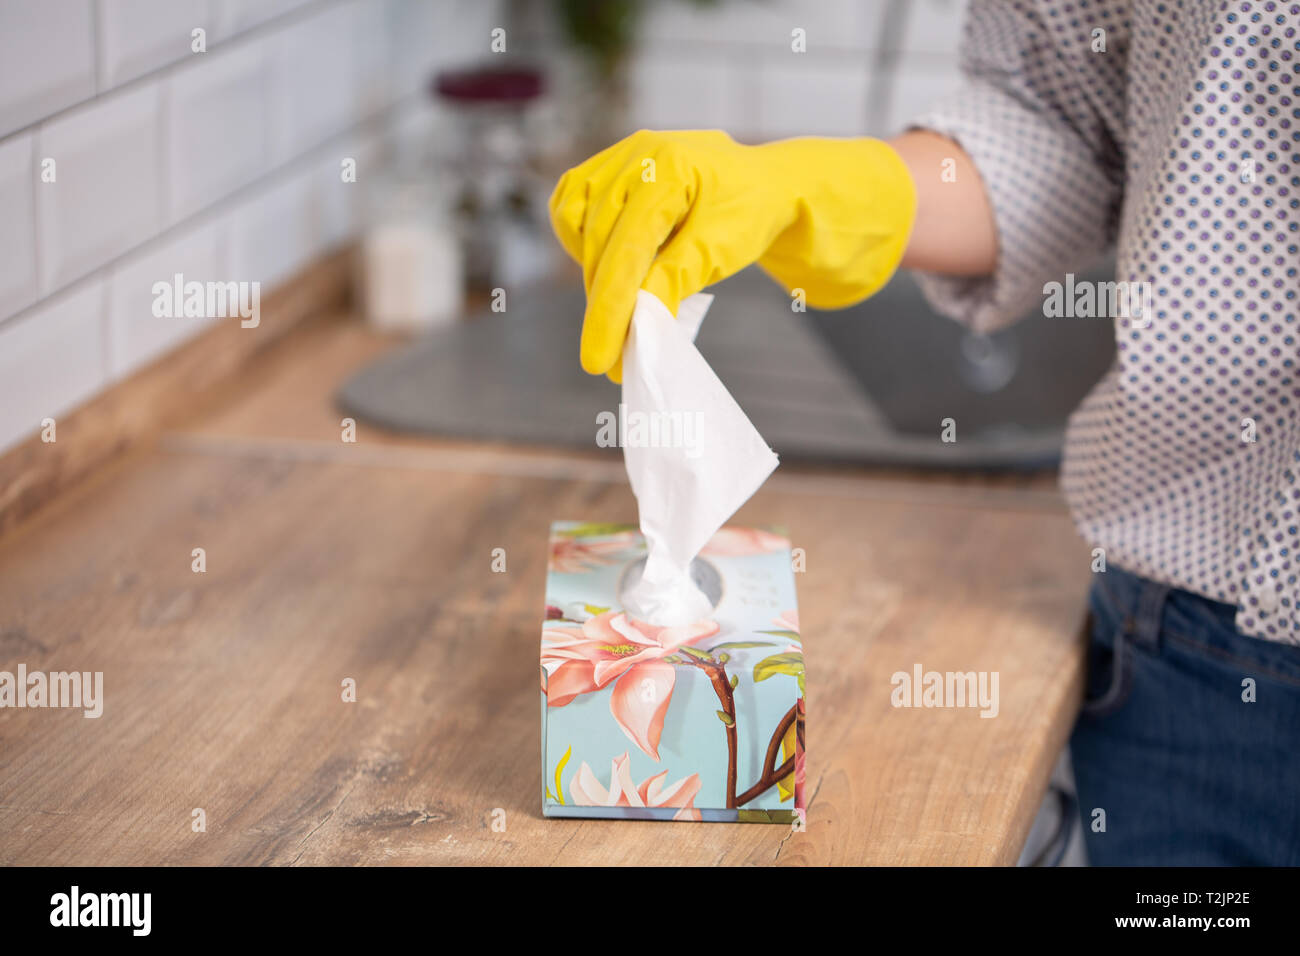 Woman taking paper tissue from napkin holder on table. Closeup photo of picking sanitary napkin out box. Hands wearing at rubber gloves Stock Photo